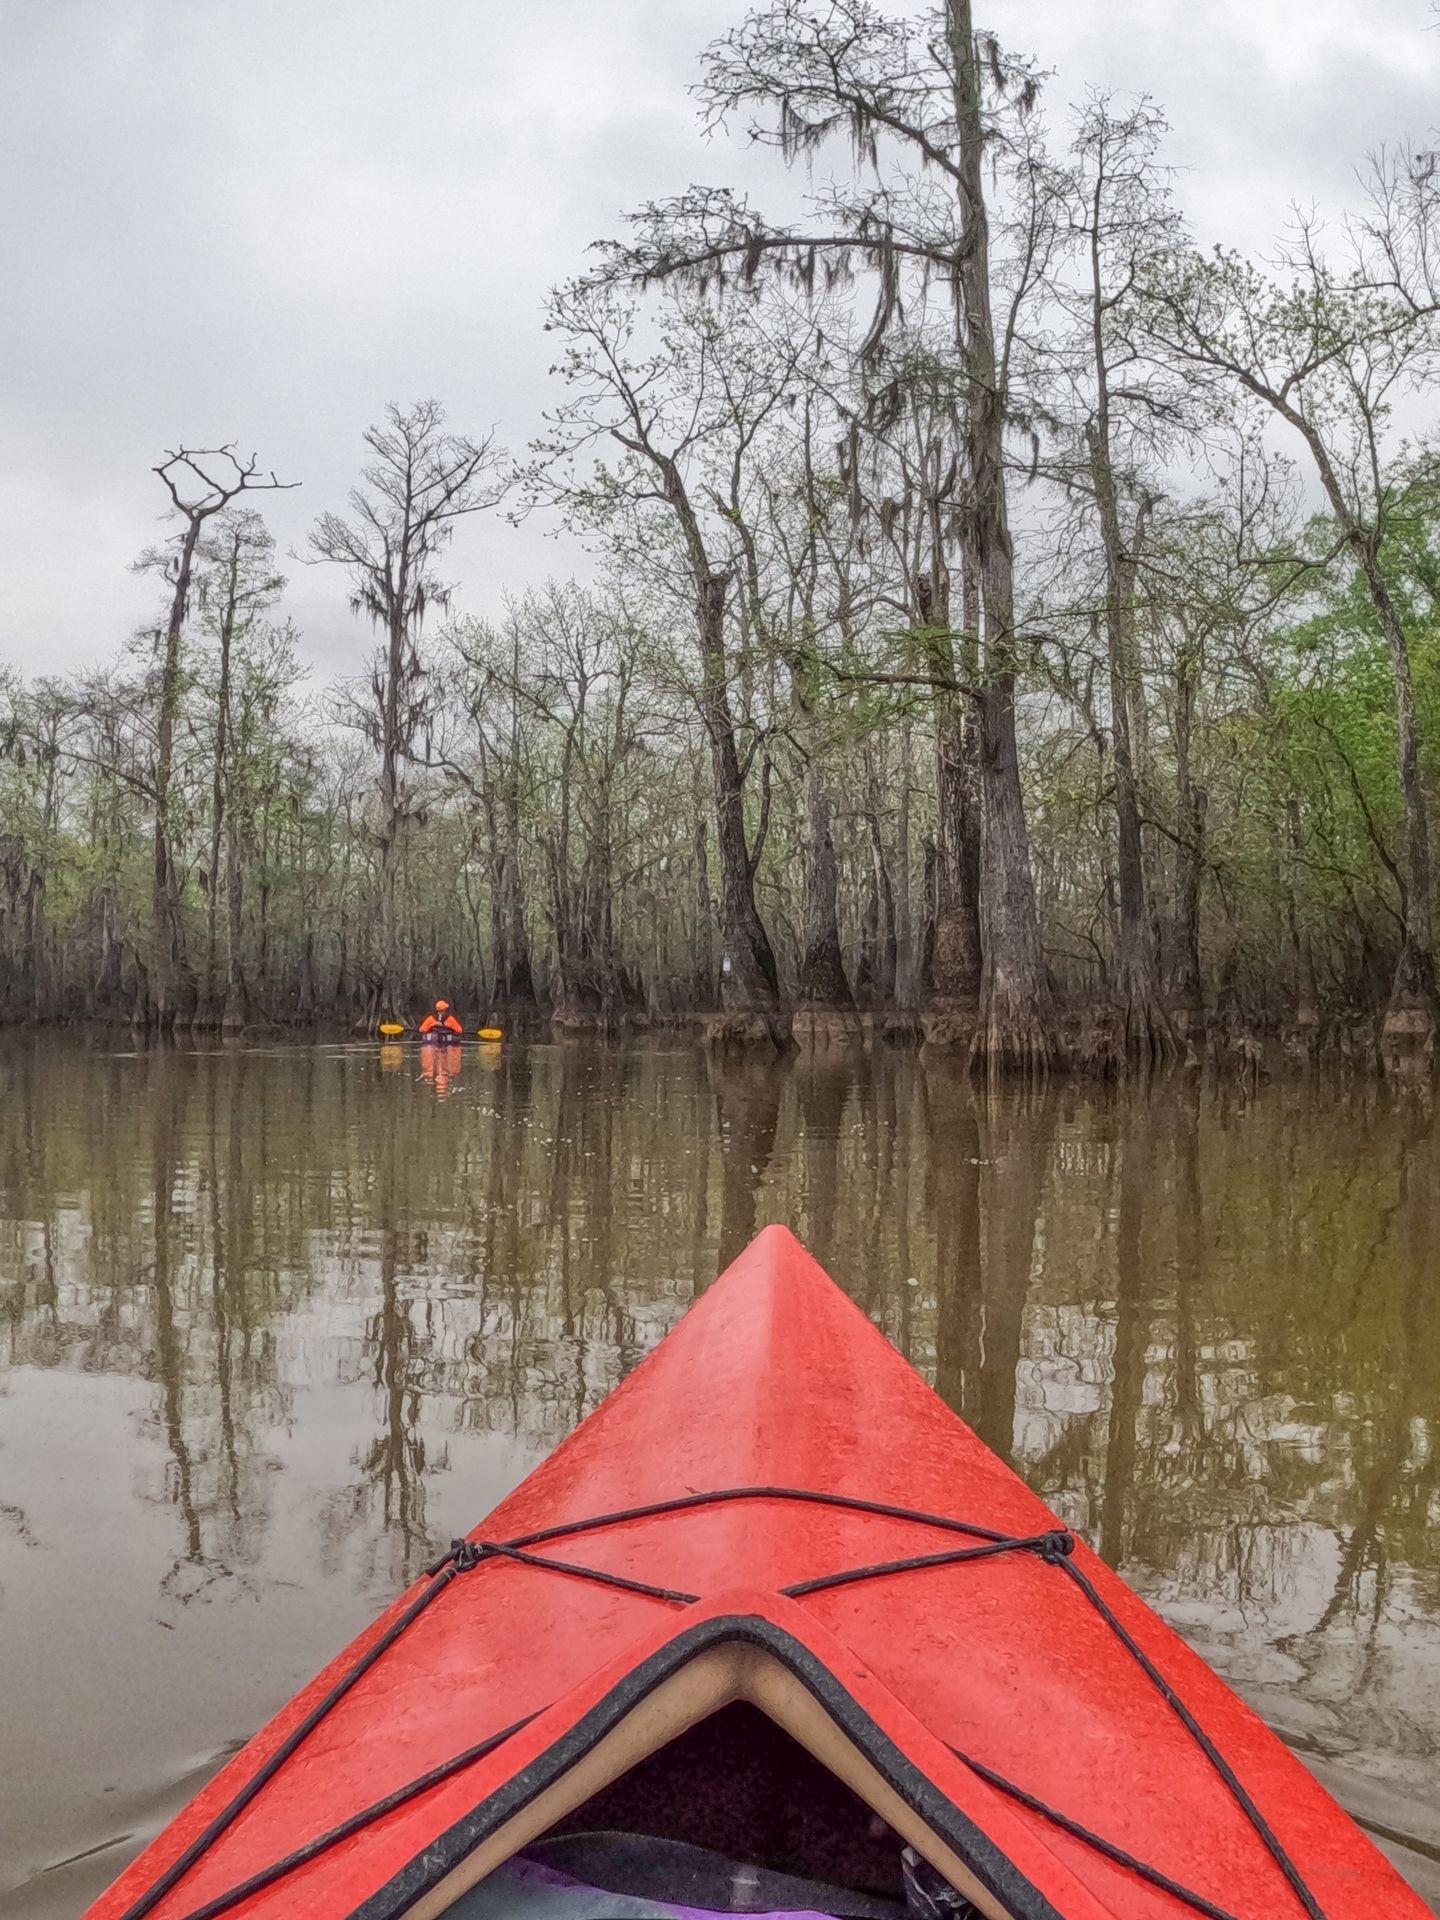 Looking out at water and trees from the front of a kayak.